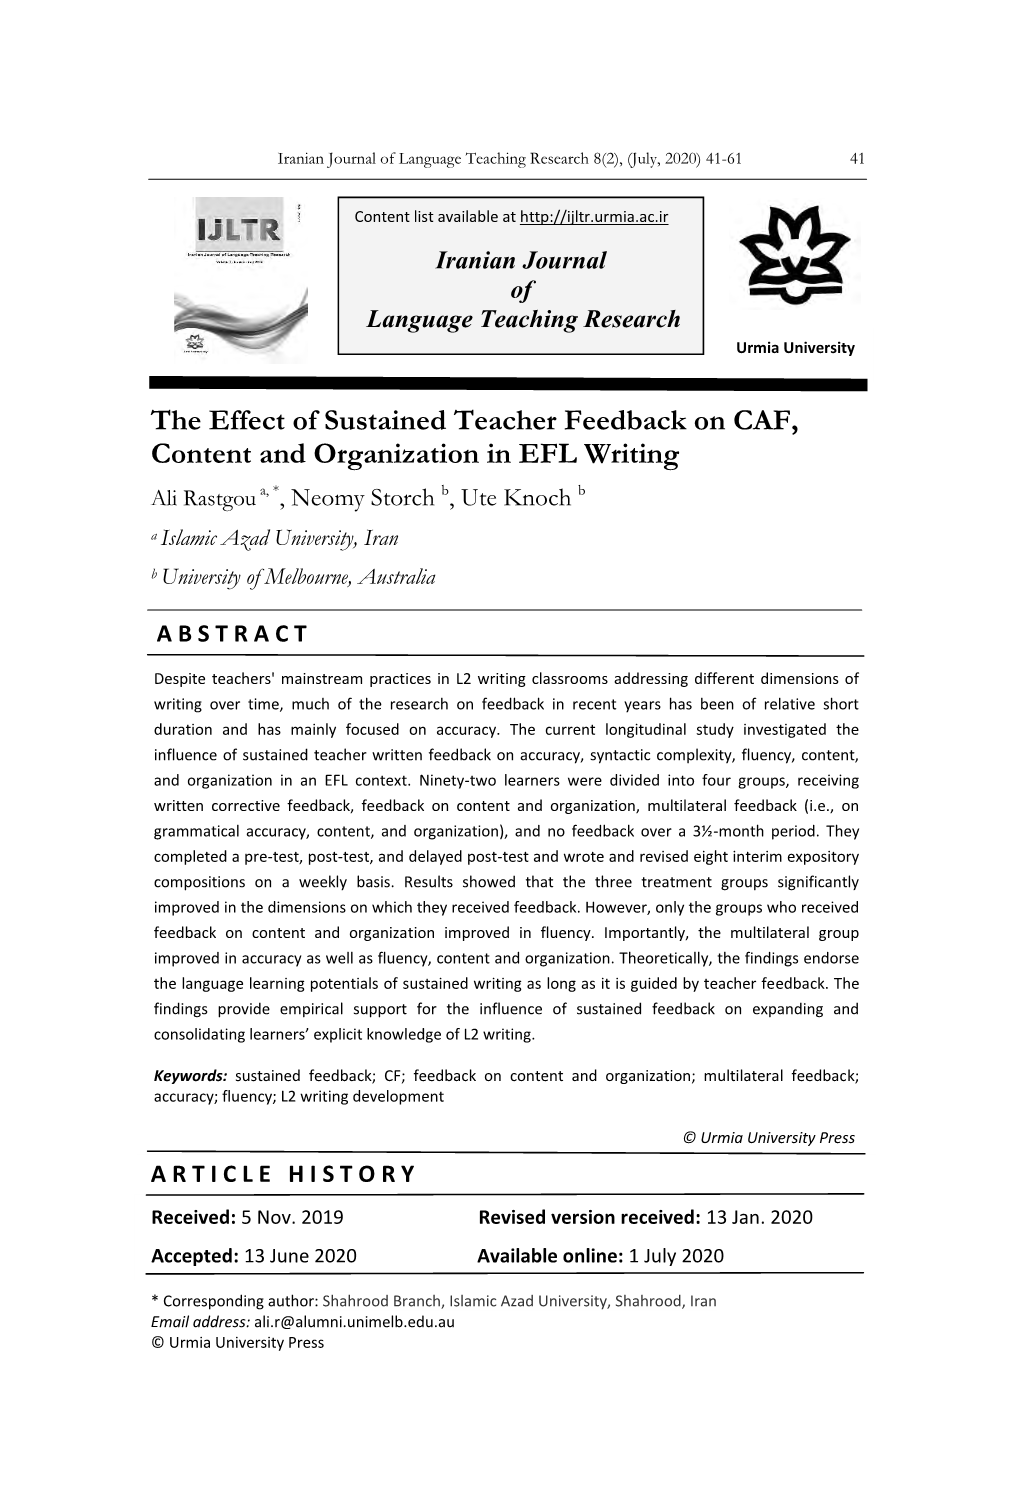 The Effect of Sustained Teacher Feedback on CAF, Content